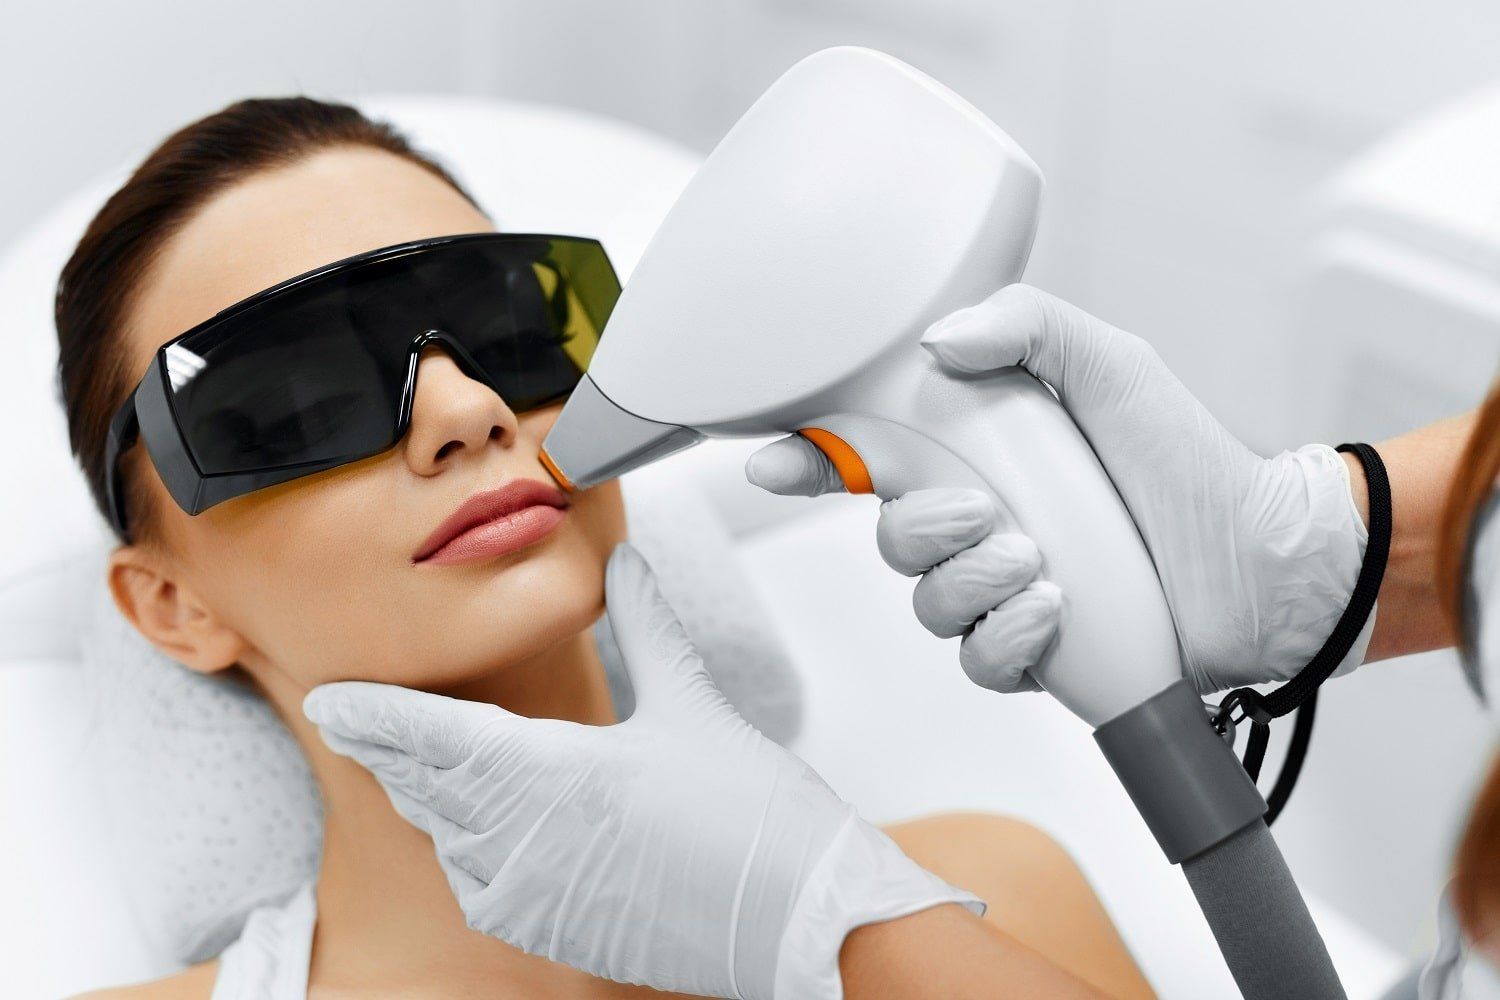 Laser Hair Removal: How Does It Work?